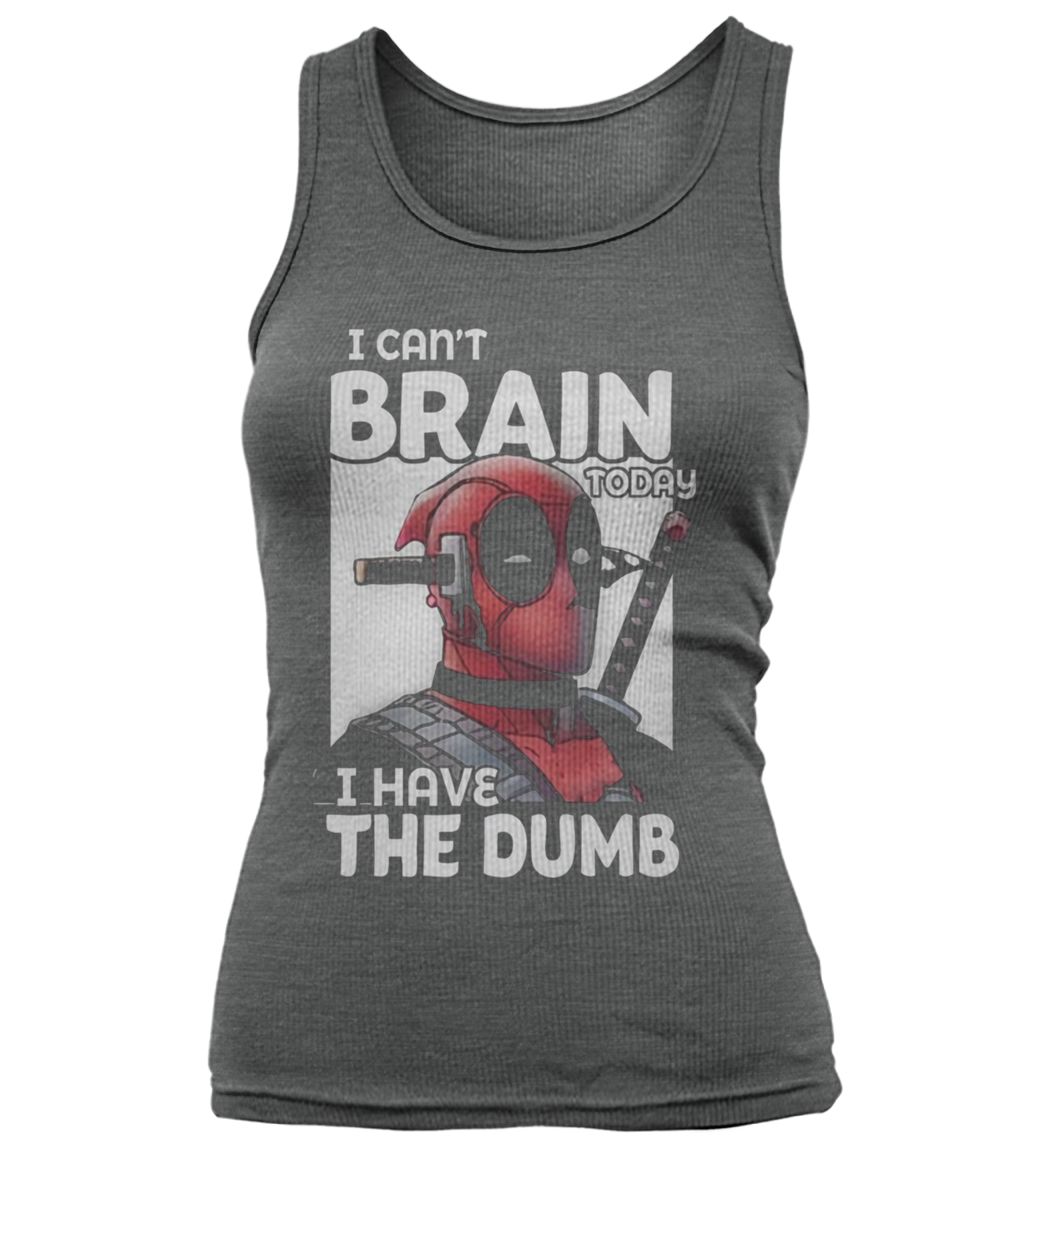 Deadpool I can't brain today I have the dumb women's tank top